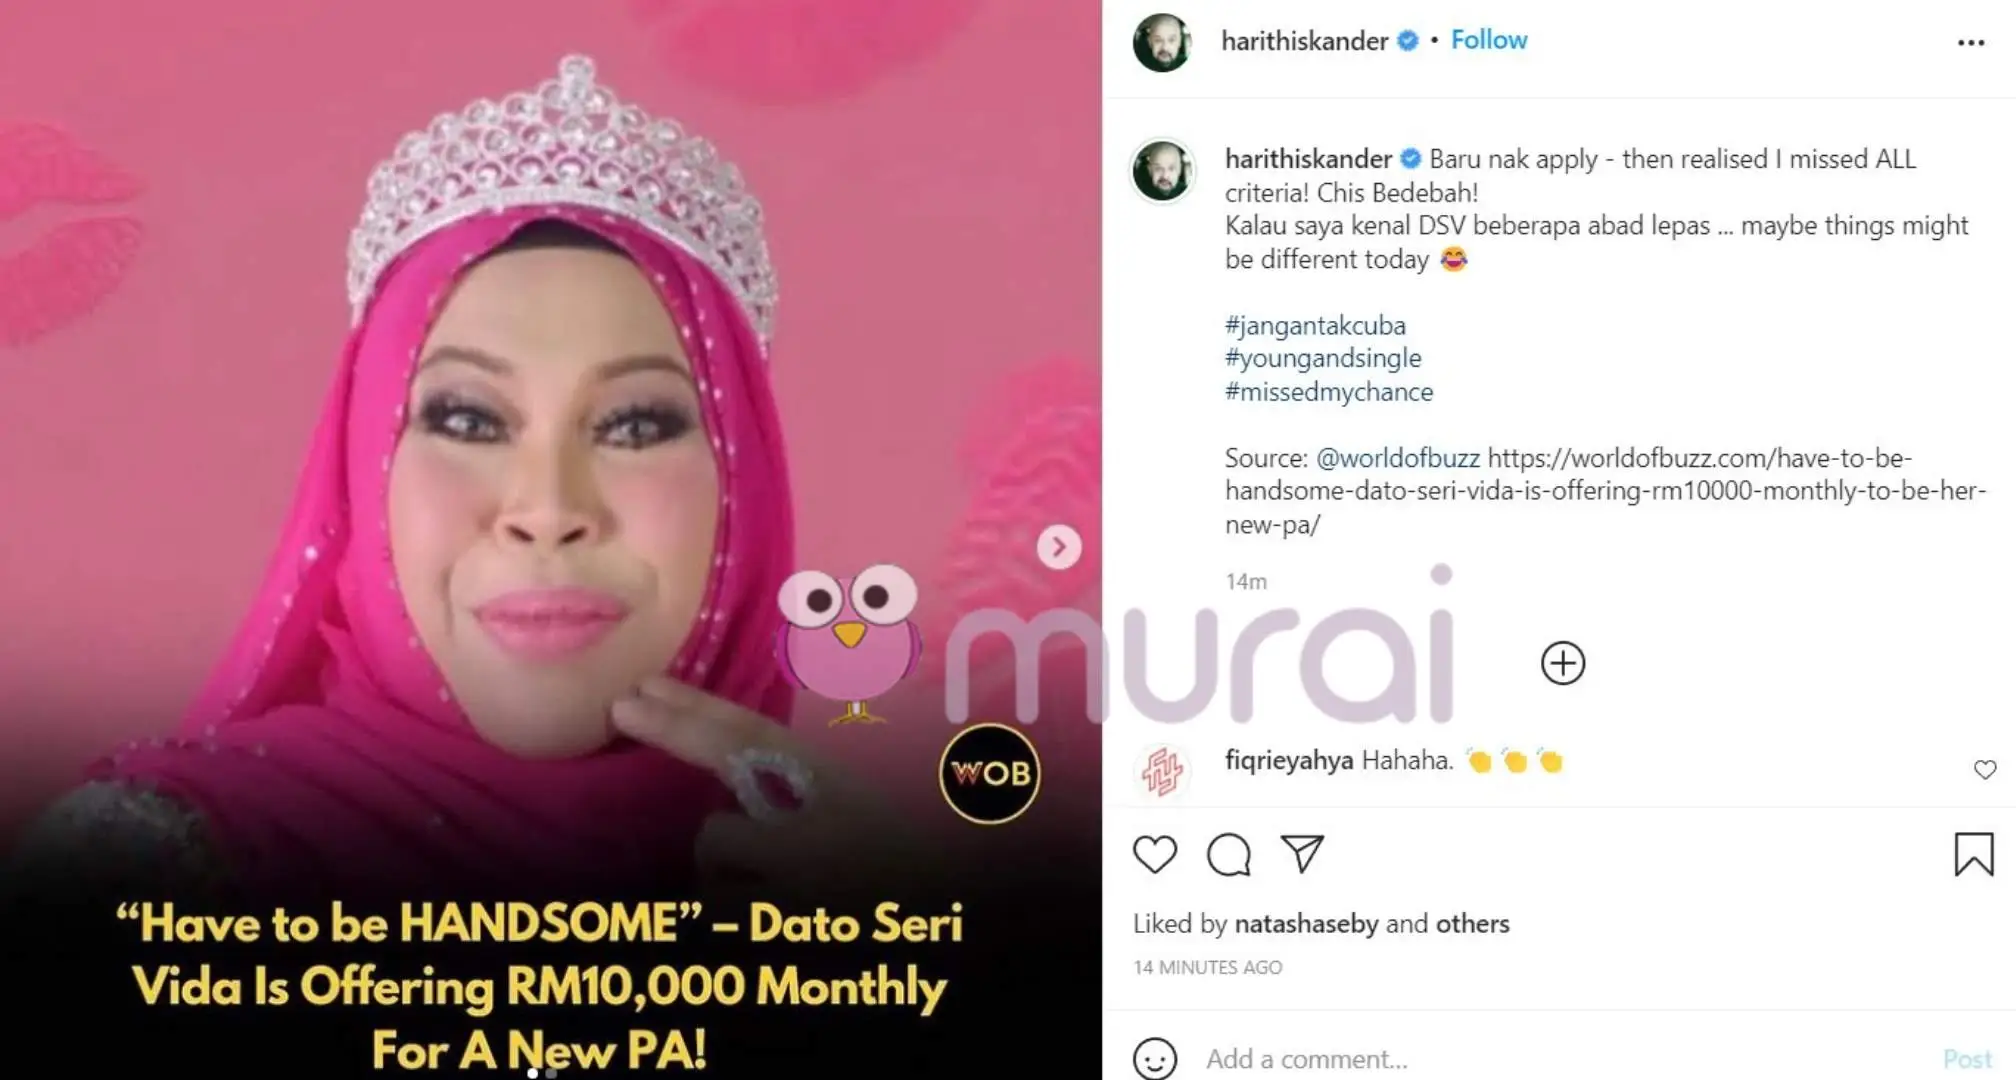 Have to be HANDSOME - Dato Seri Vida Is Offering RM10,000 Monthly